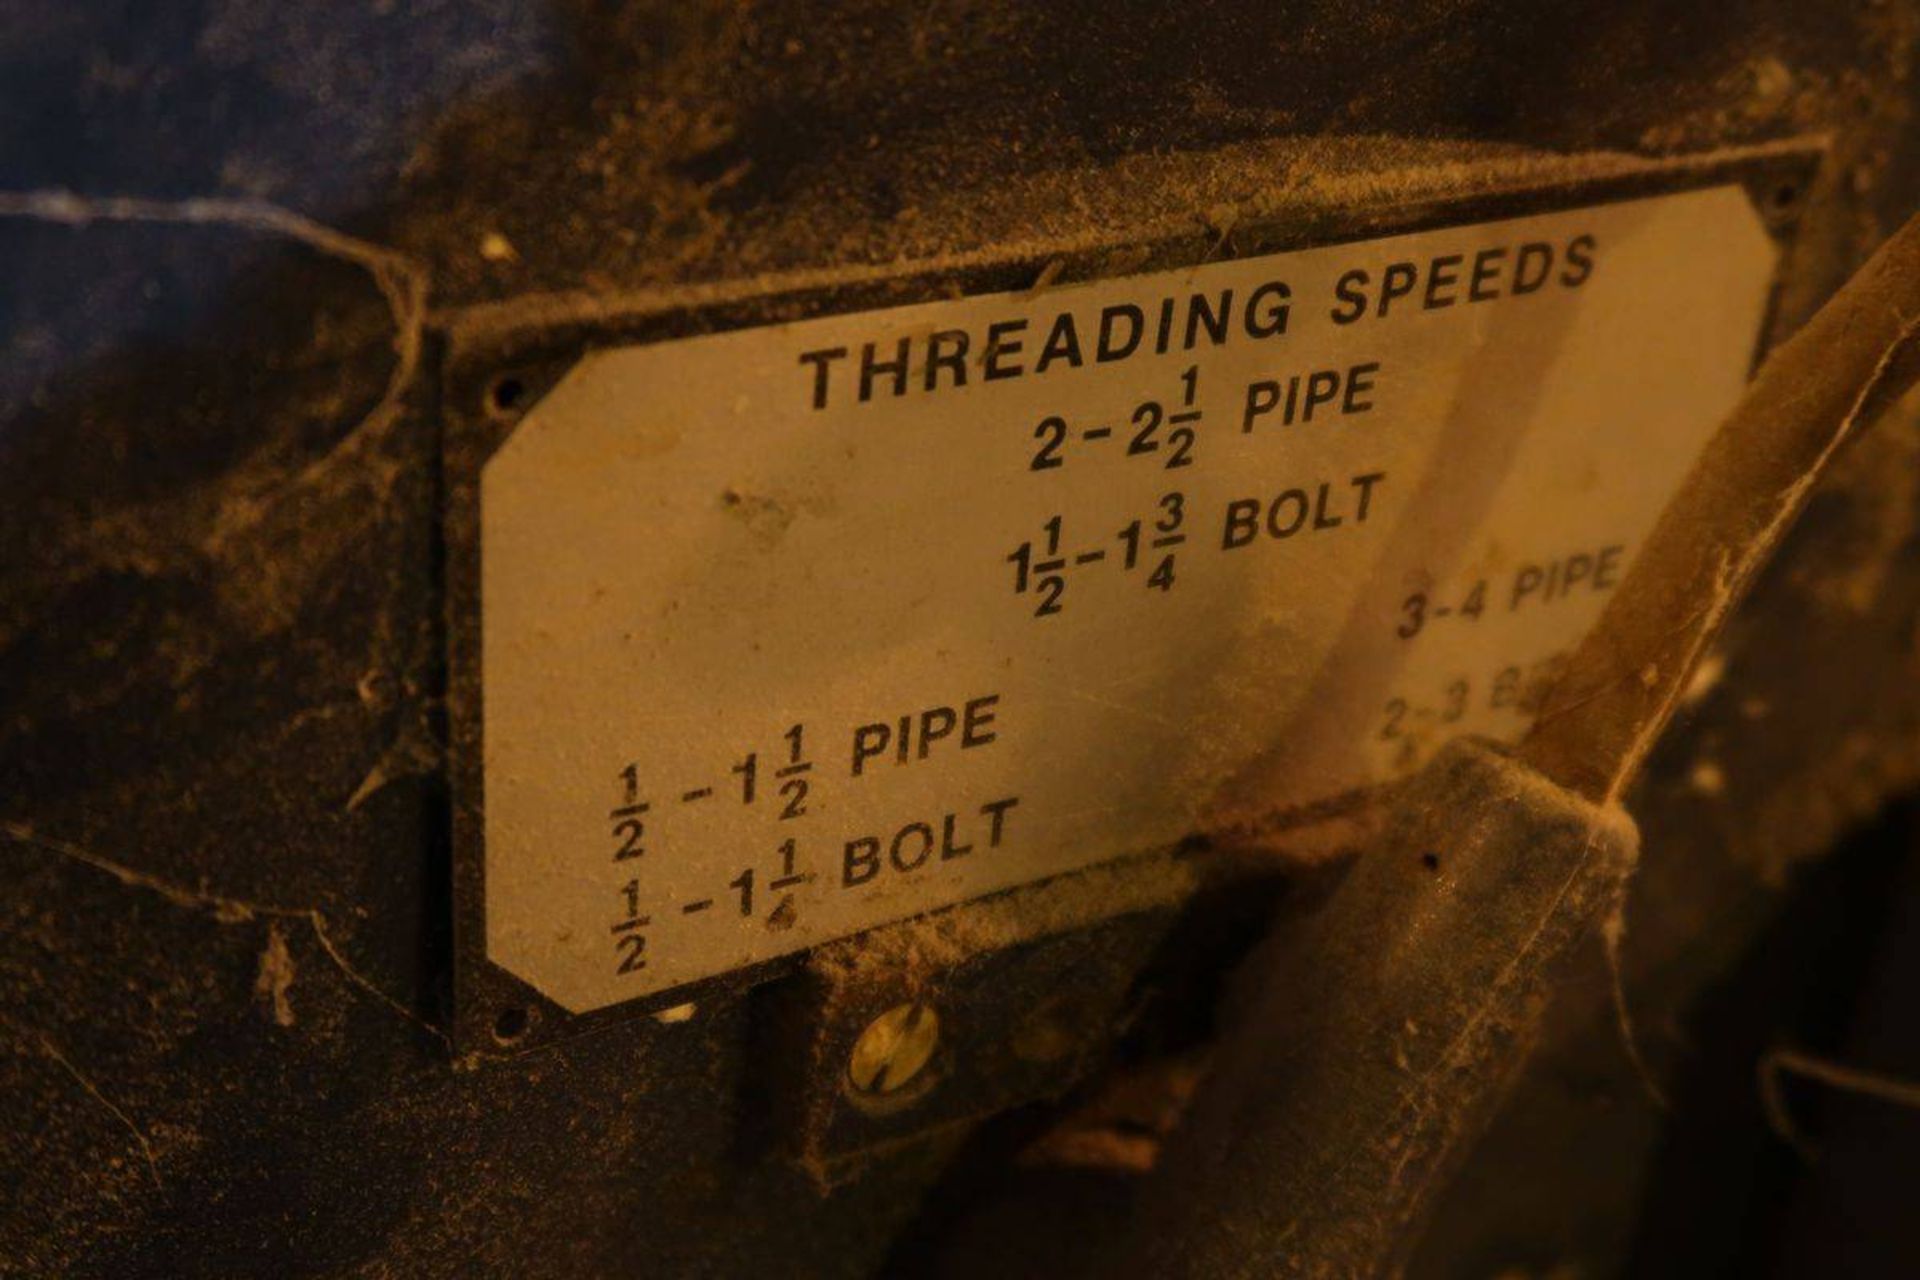 Teledyne Oster 774 Pipe Threading Machine - Image 4 of 5